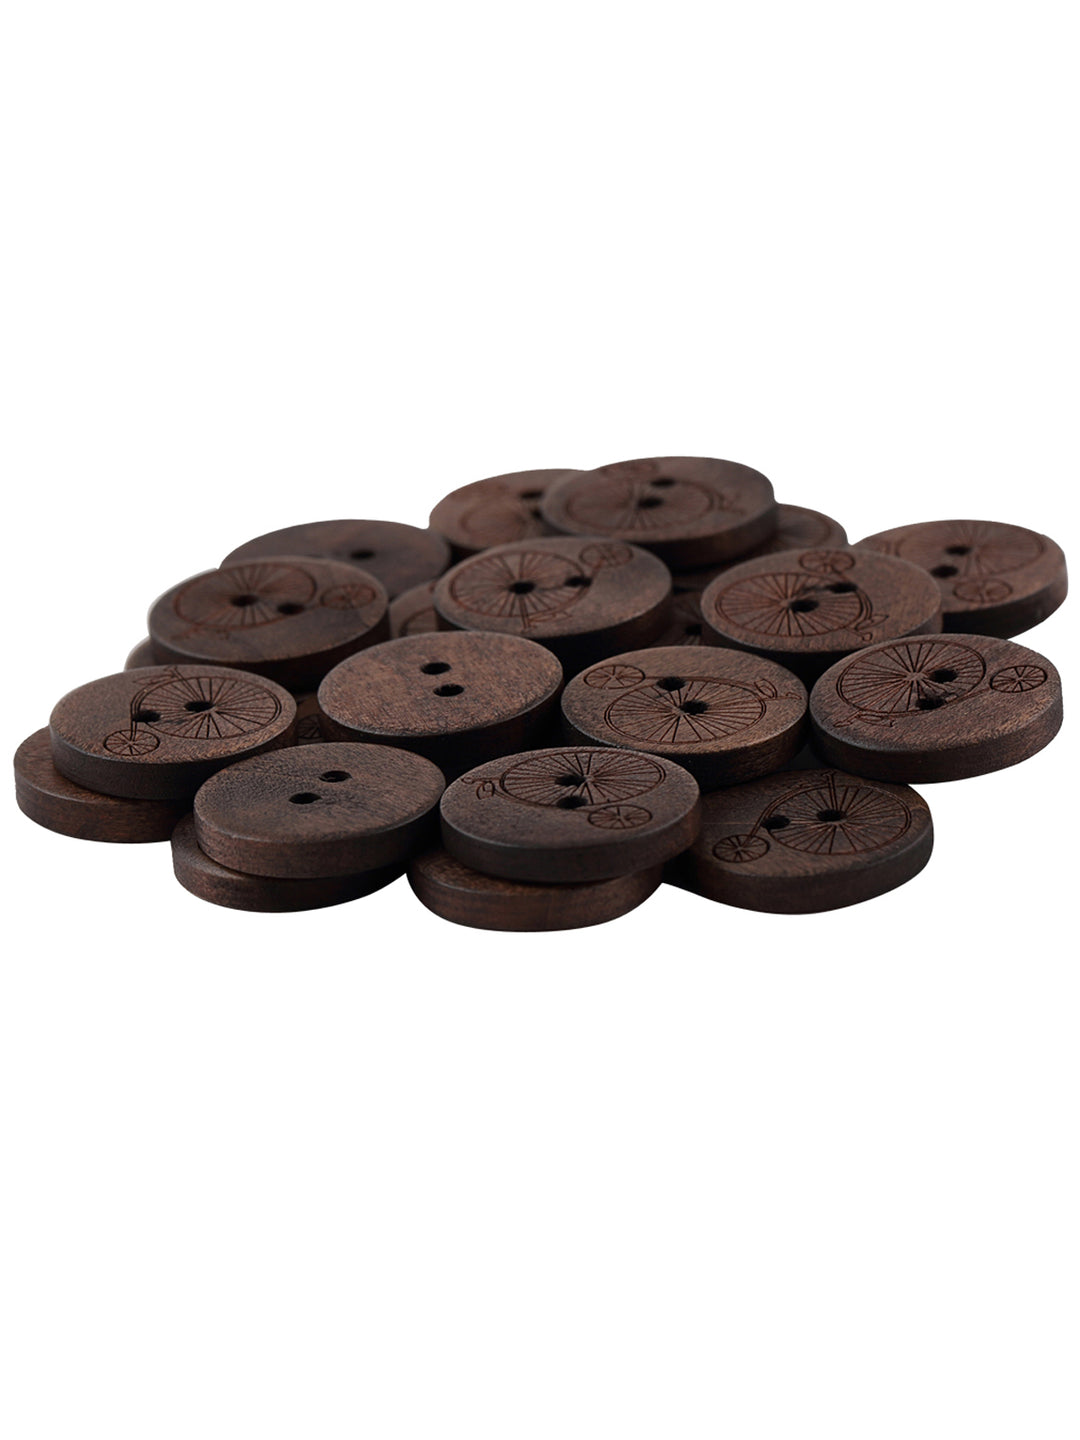 Classic Cycle Design 2-Hole Wooden Brown Buttons